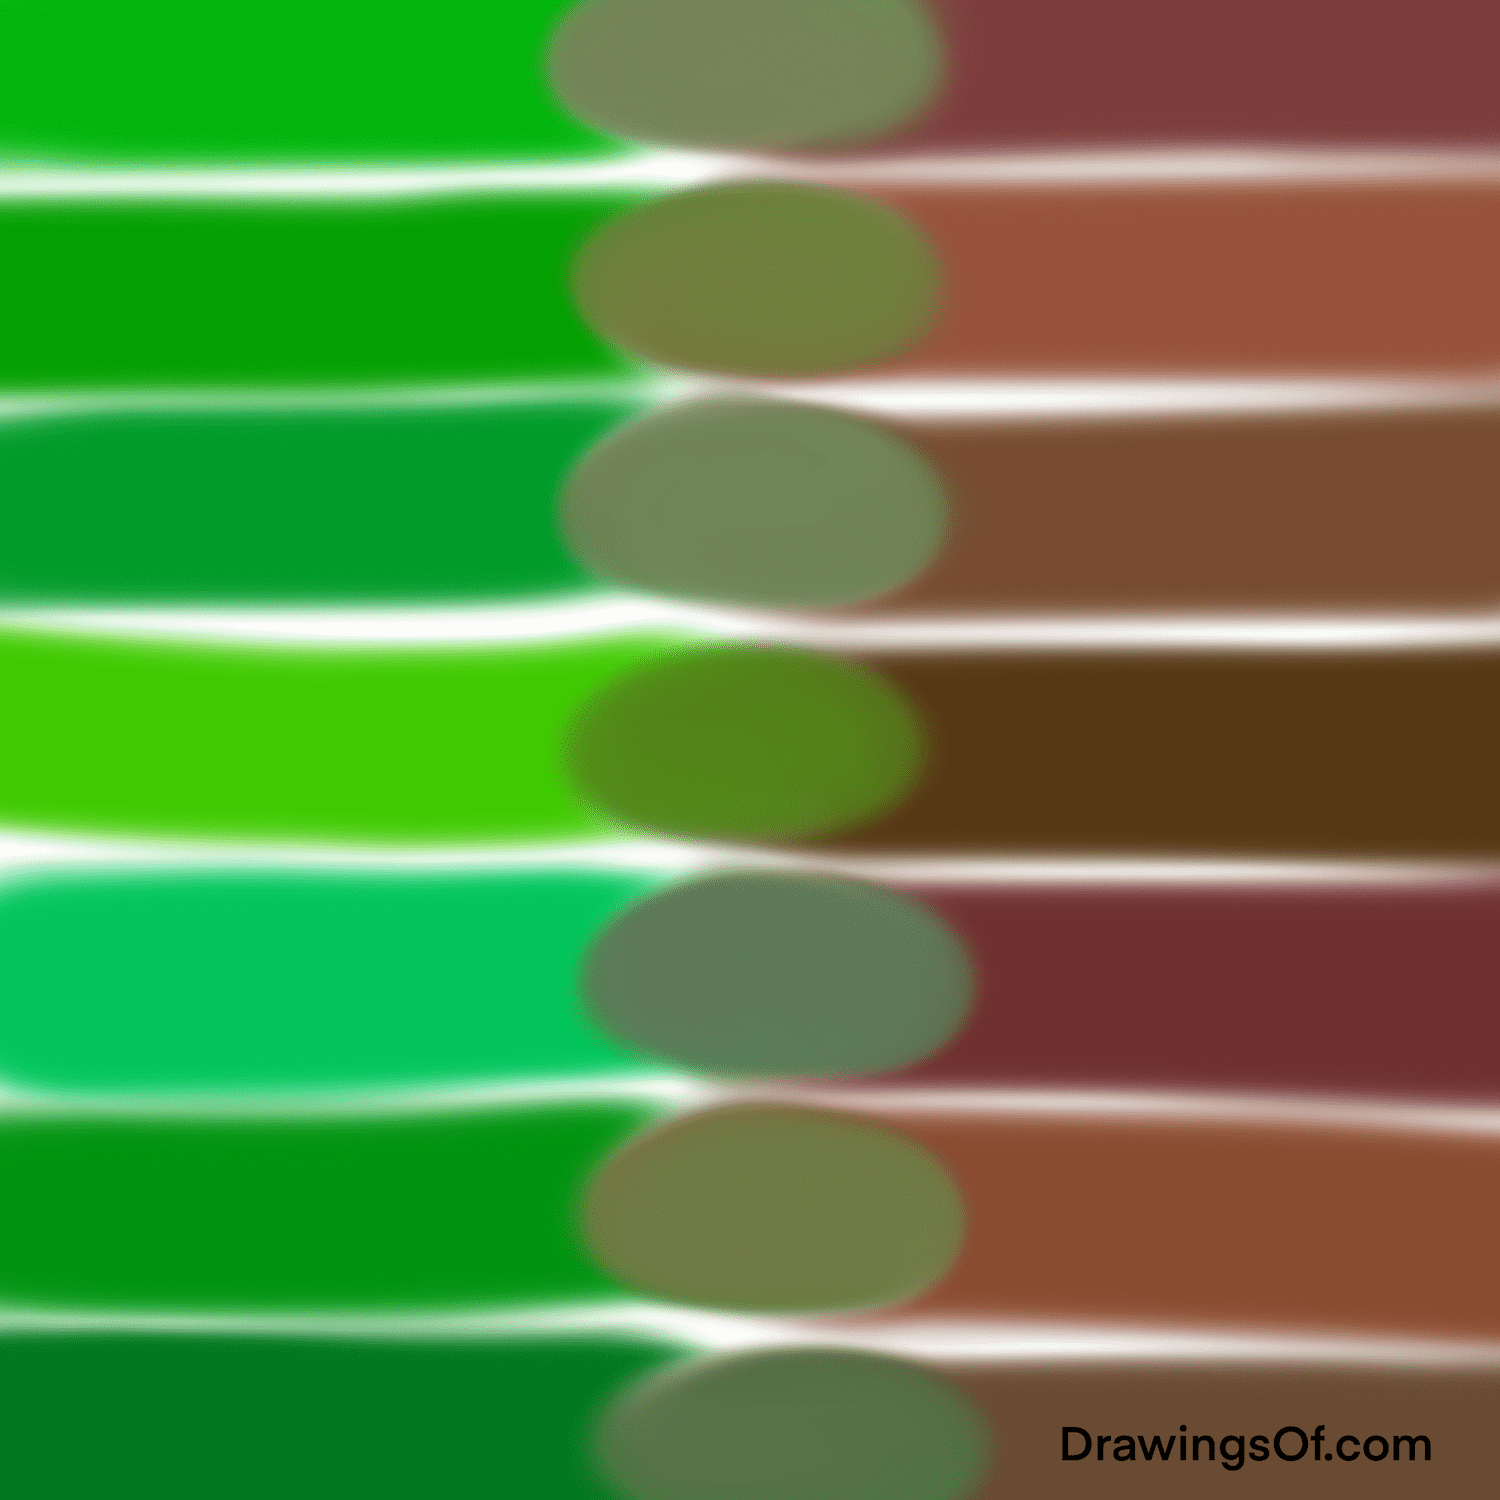 Brown and Green Color When Mixed? - Drawings Of...